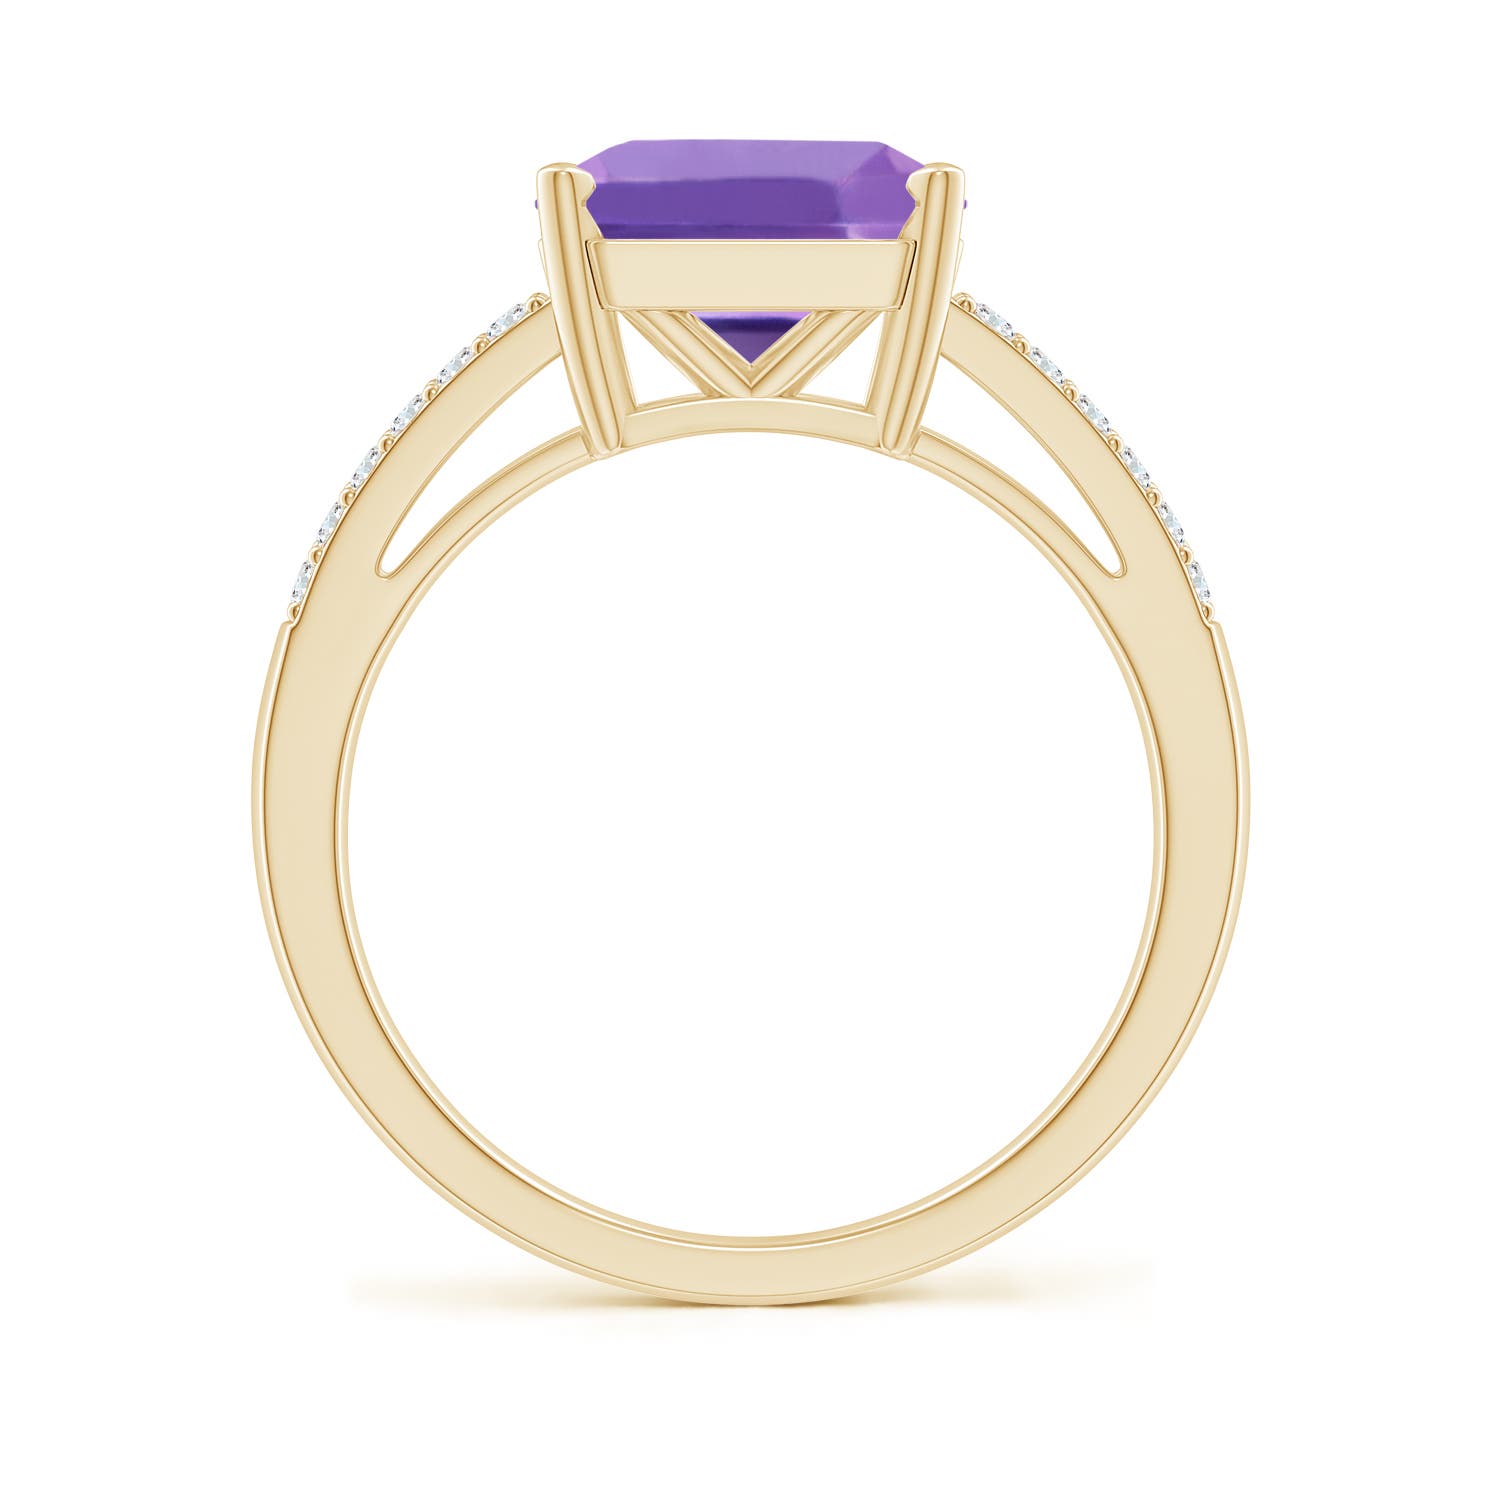 A - Amethyst / 3.04 CT / 14 KT Yellow Gold